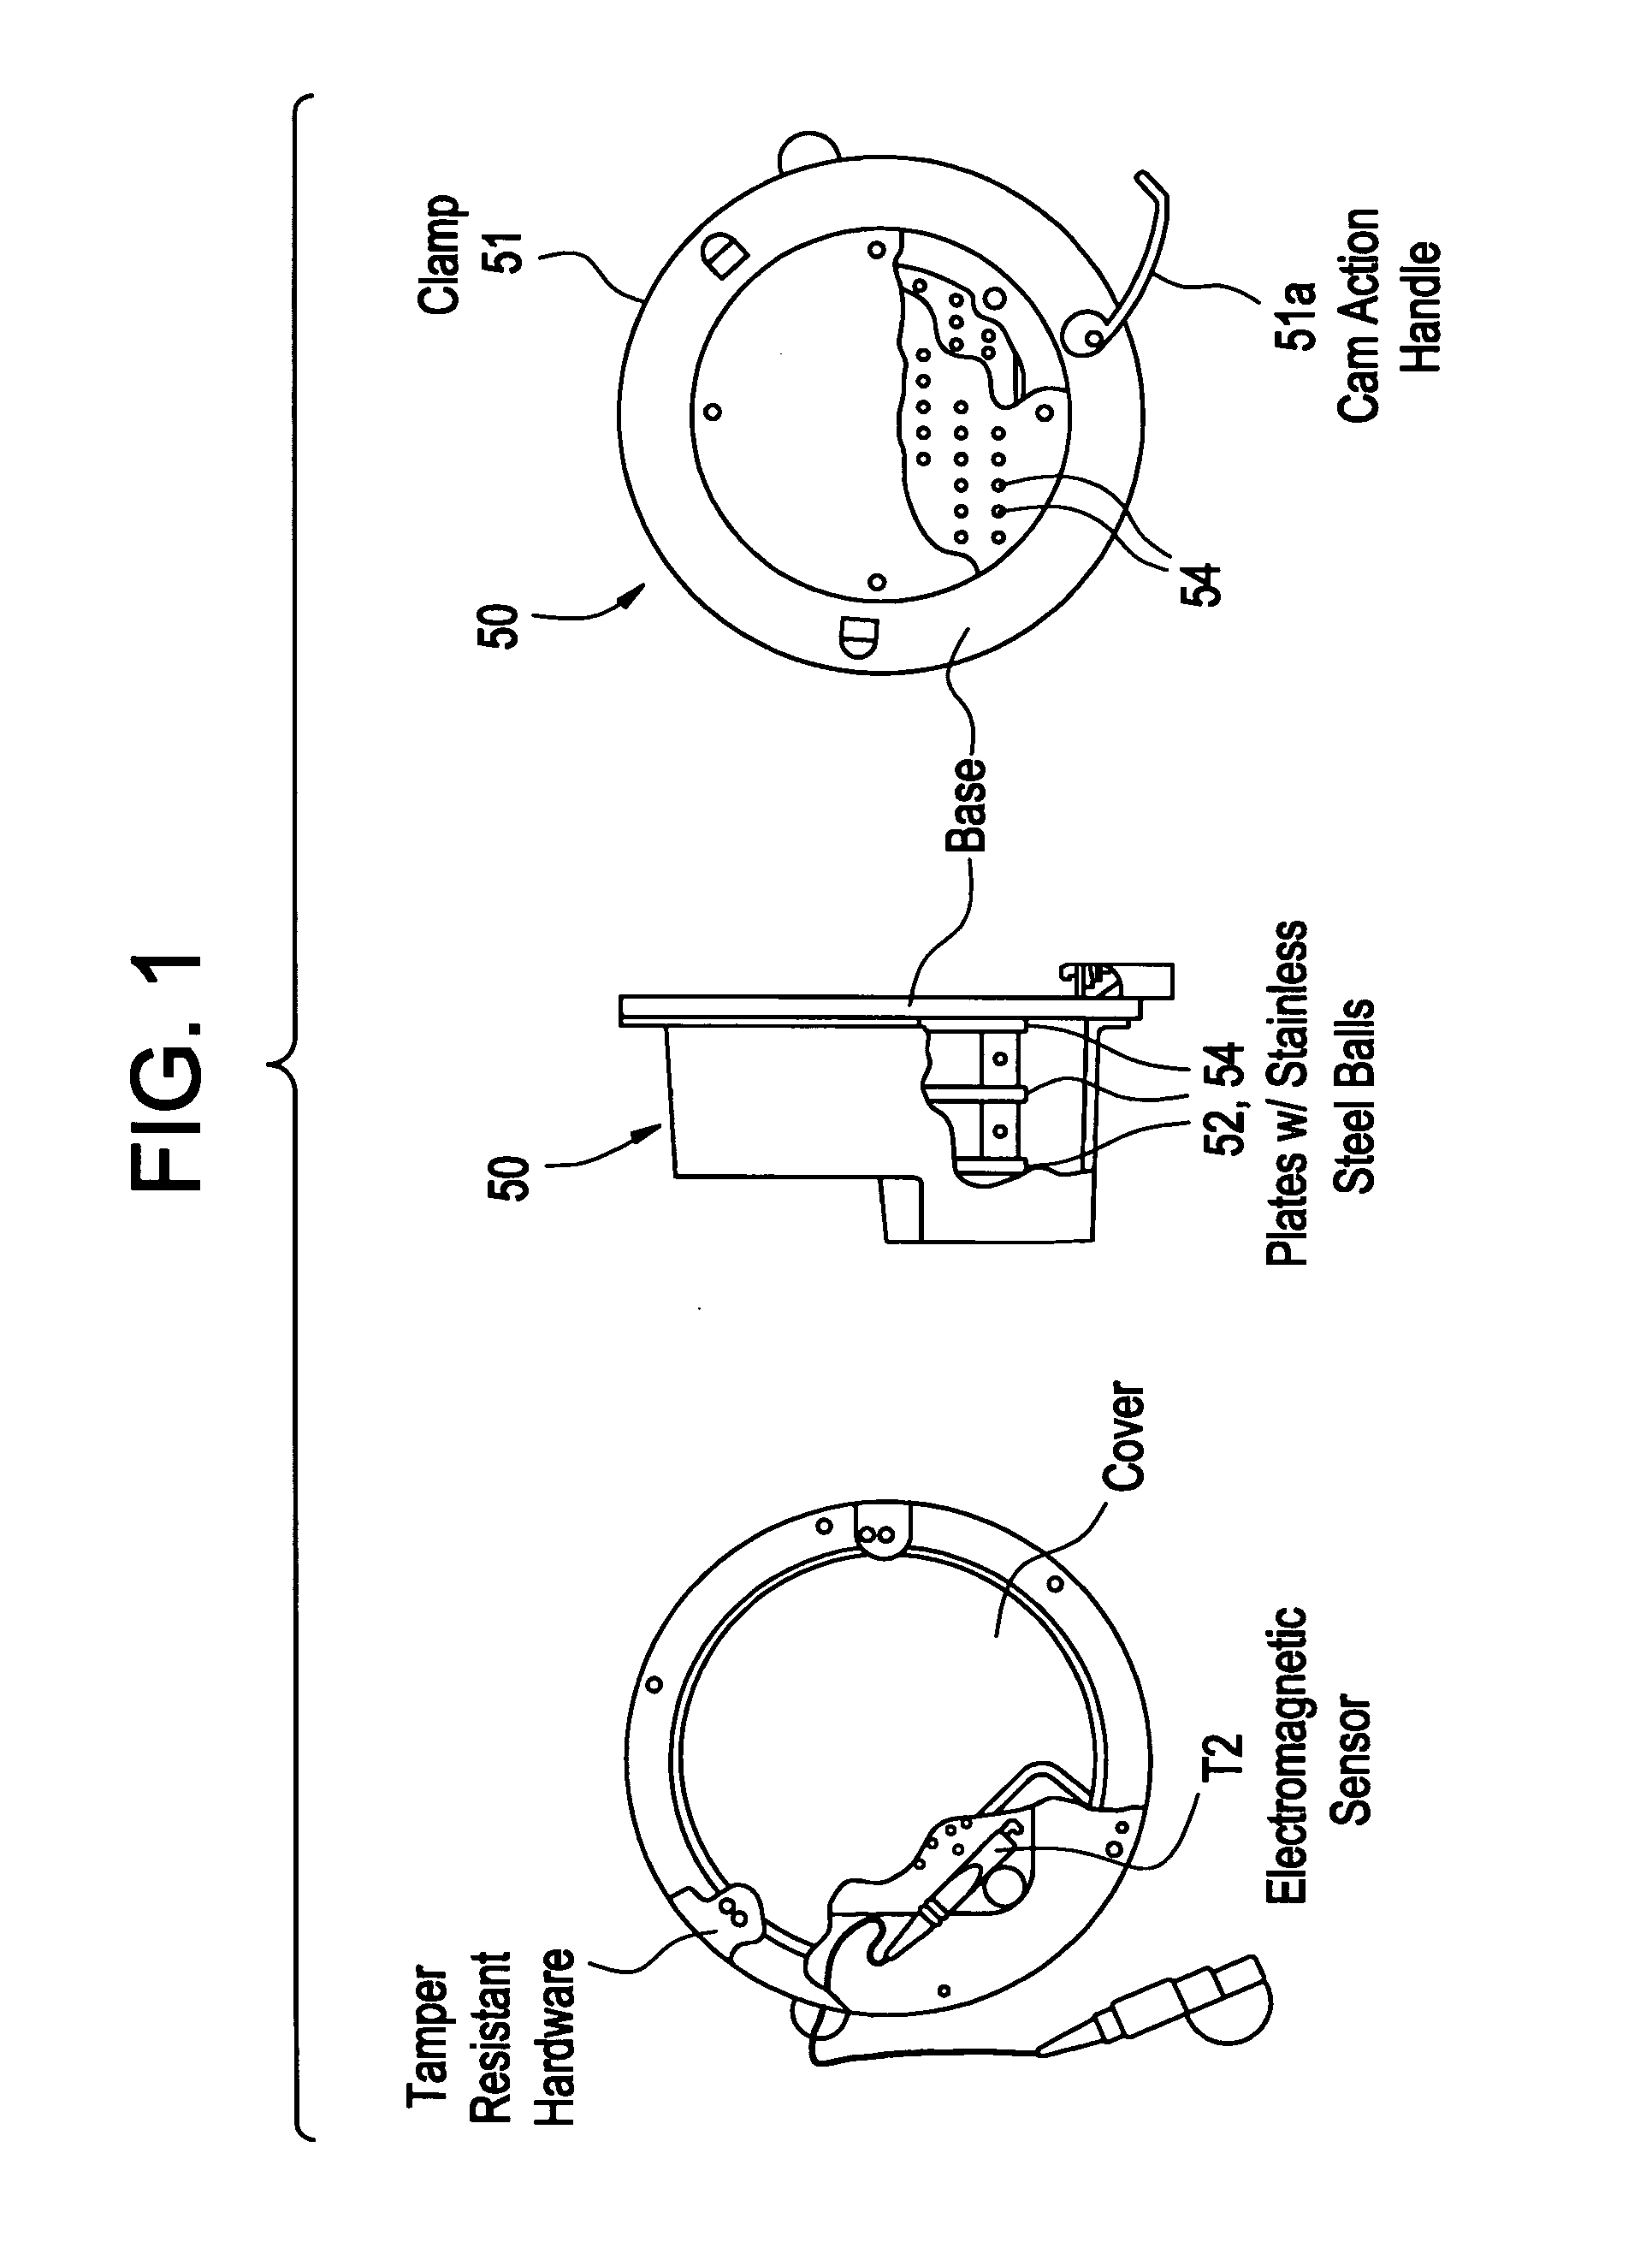 System and method for integration of a calibration target into a C-arm